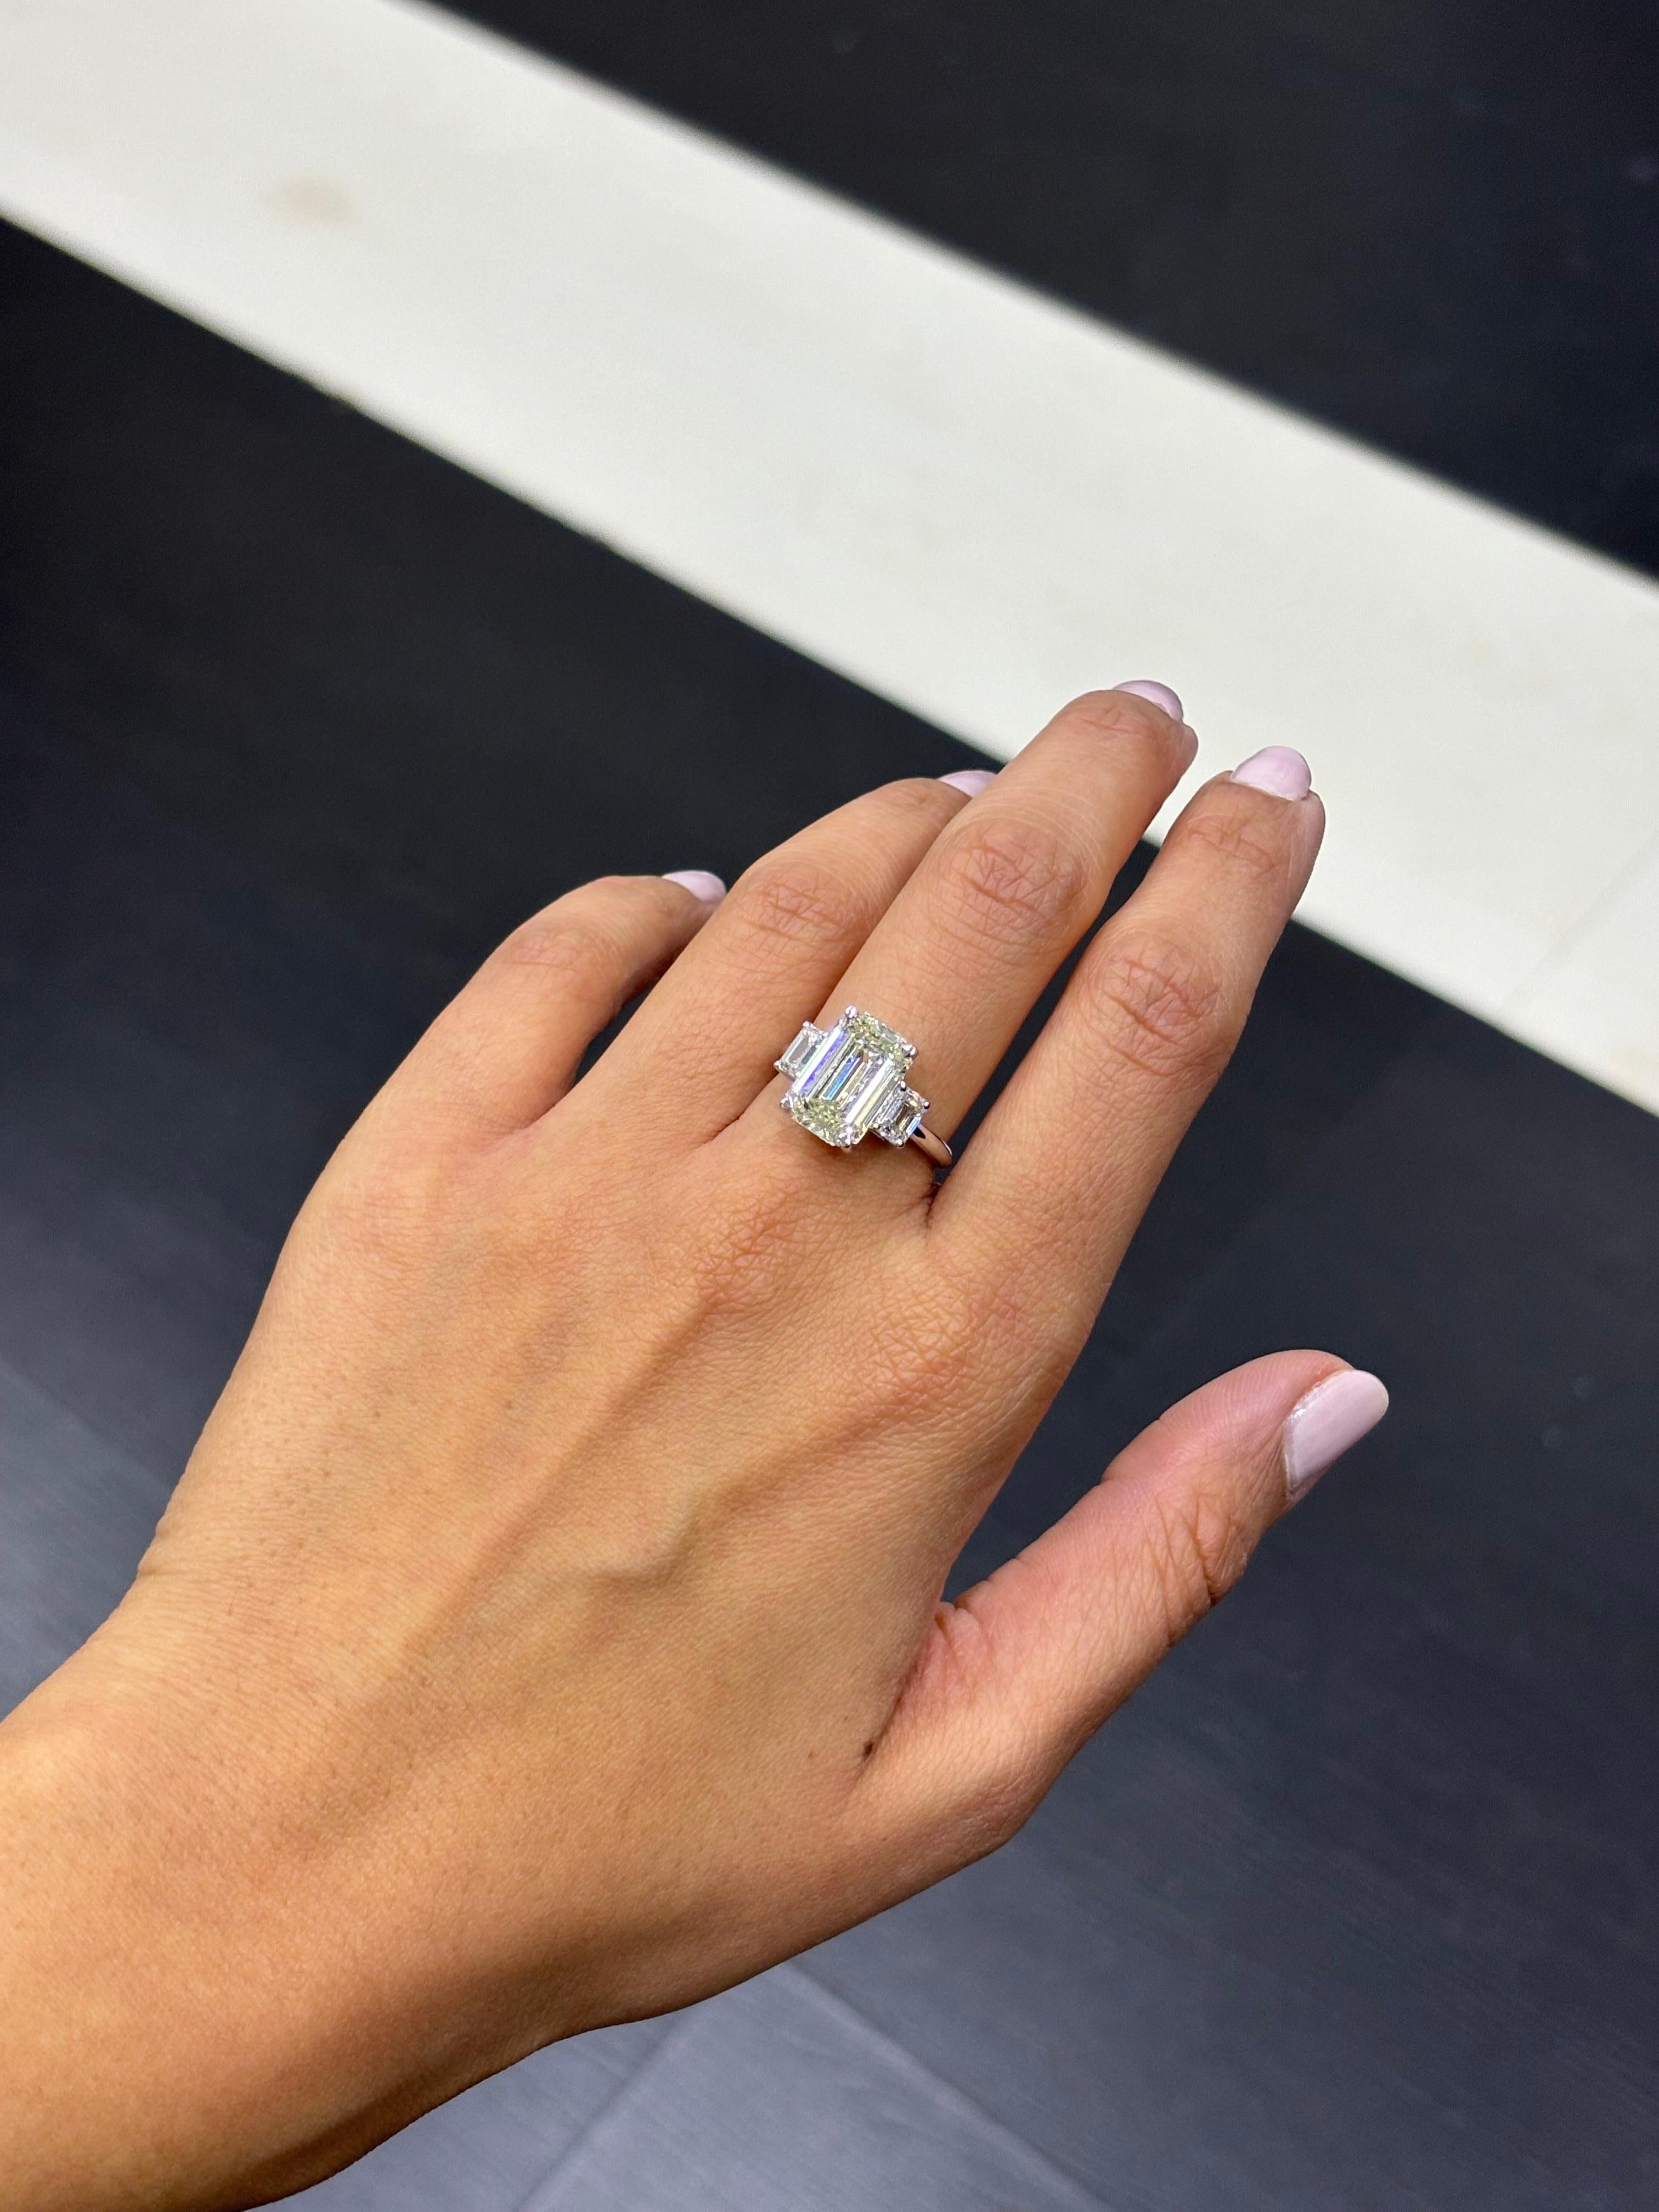 A classic 5.02 carat, GIA certified emerald cut Diamond three stone engagement ring, with 2 0.51 carat each emerald cut side stones VS1/VS2 clarity, H-I color. 
The center stone is GIA certified, N color, SI2 clarity. Set in solid 18K White Gold,